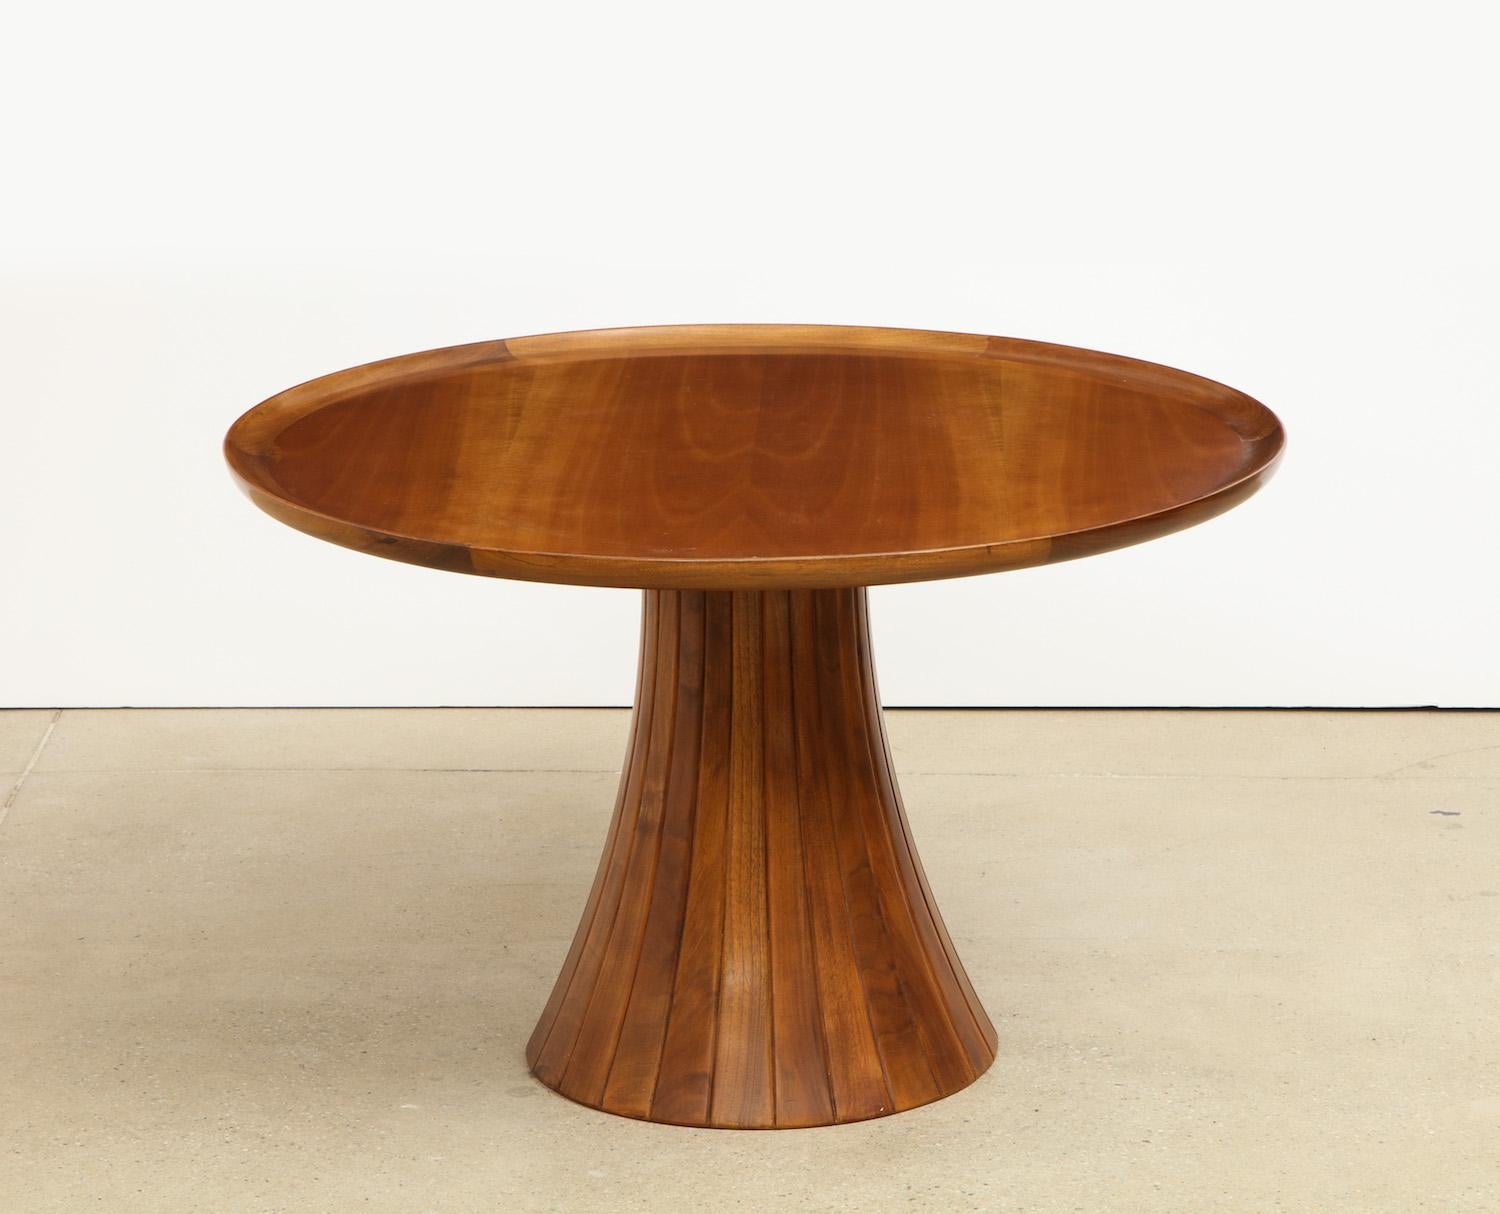 Walnut table featuring a wide pedestal base with incised vertical lines. Circular top with beautifully figured wood and elegant outside lip. This table was custom made for a home in Milano that featured many Borsani pieces and is believed to have